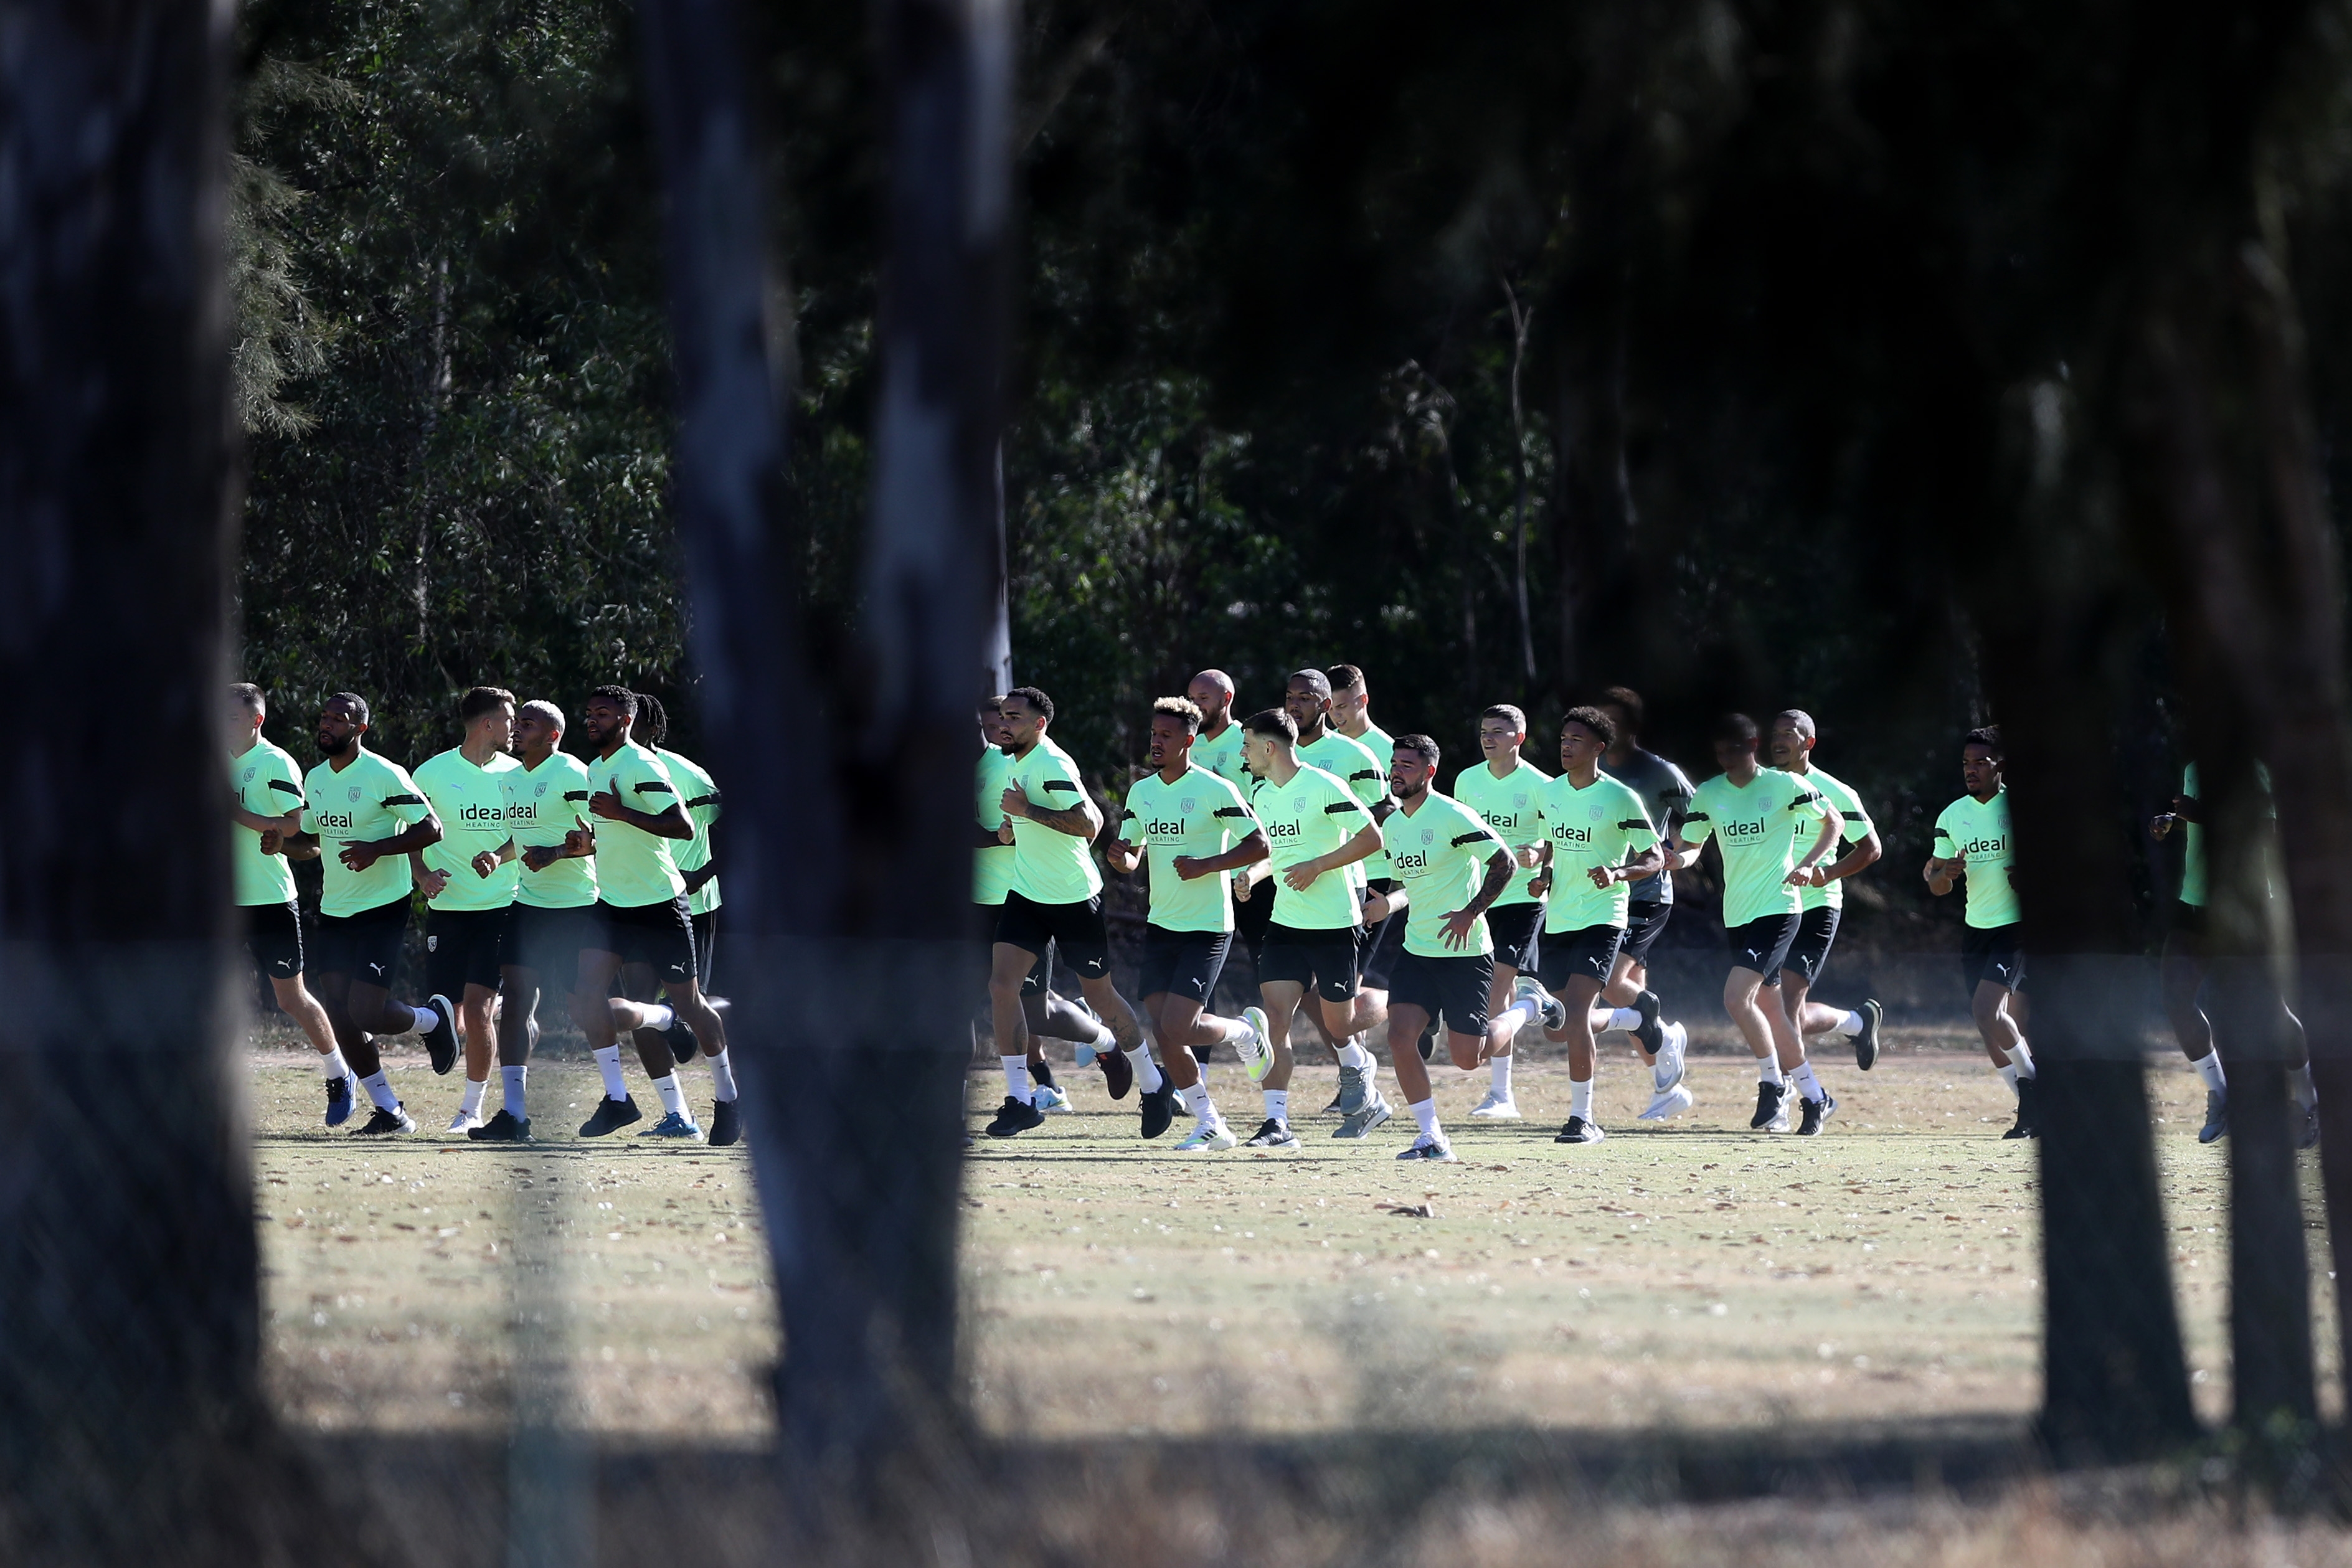 Albion players train in Portugal.